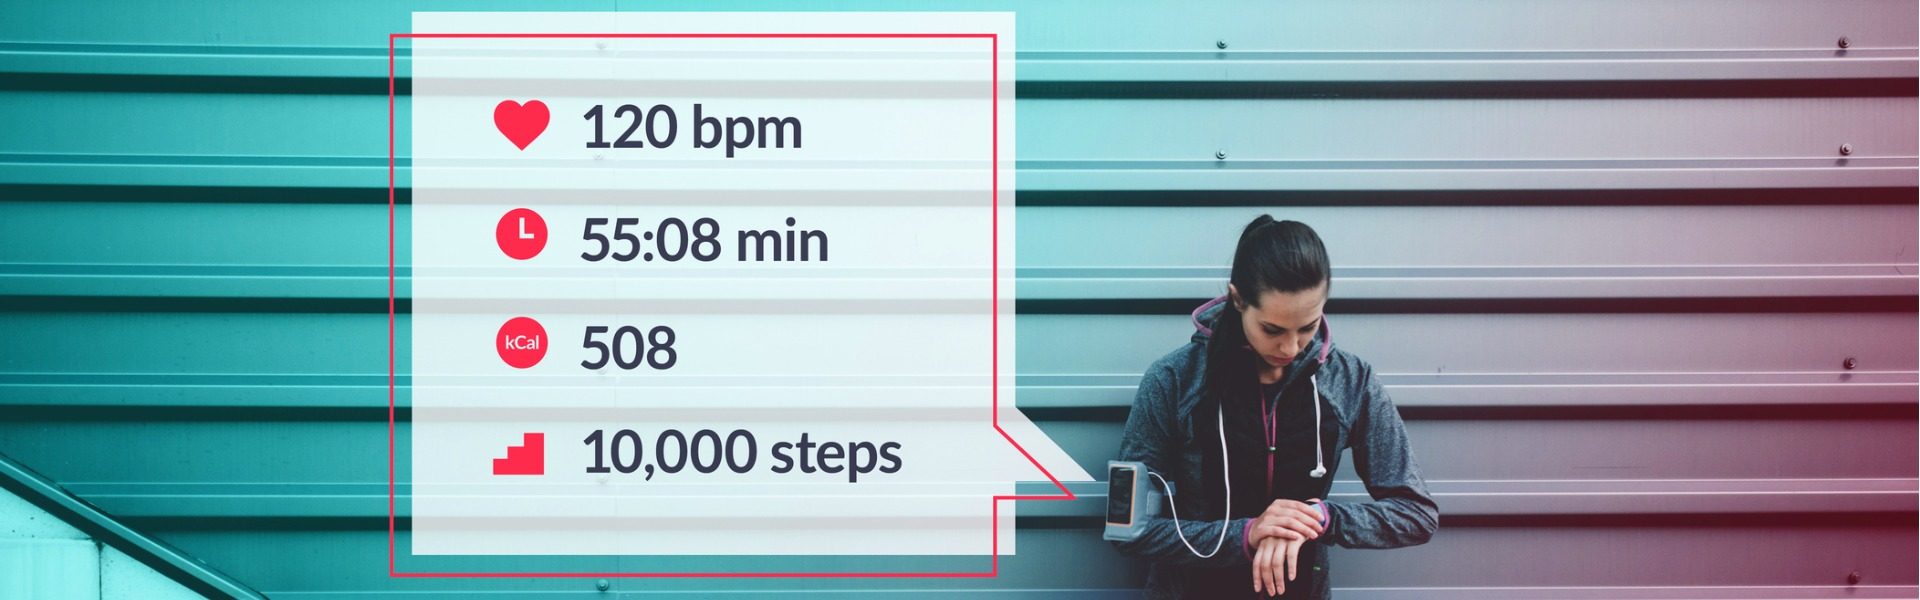 fitness trackers _ exercise _ mercy health